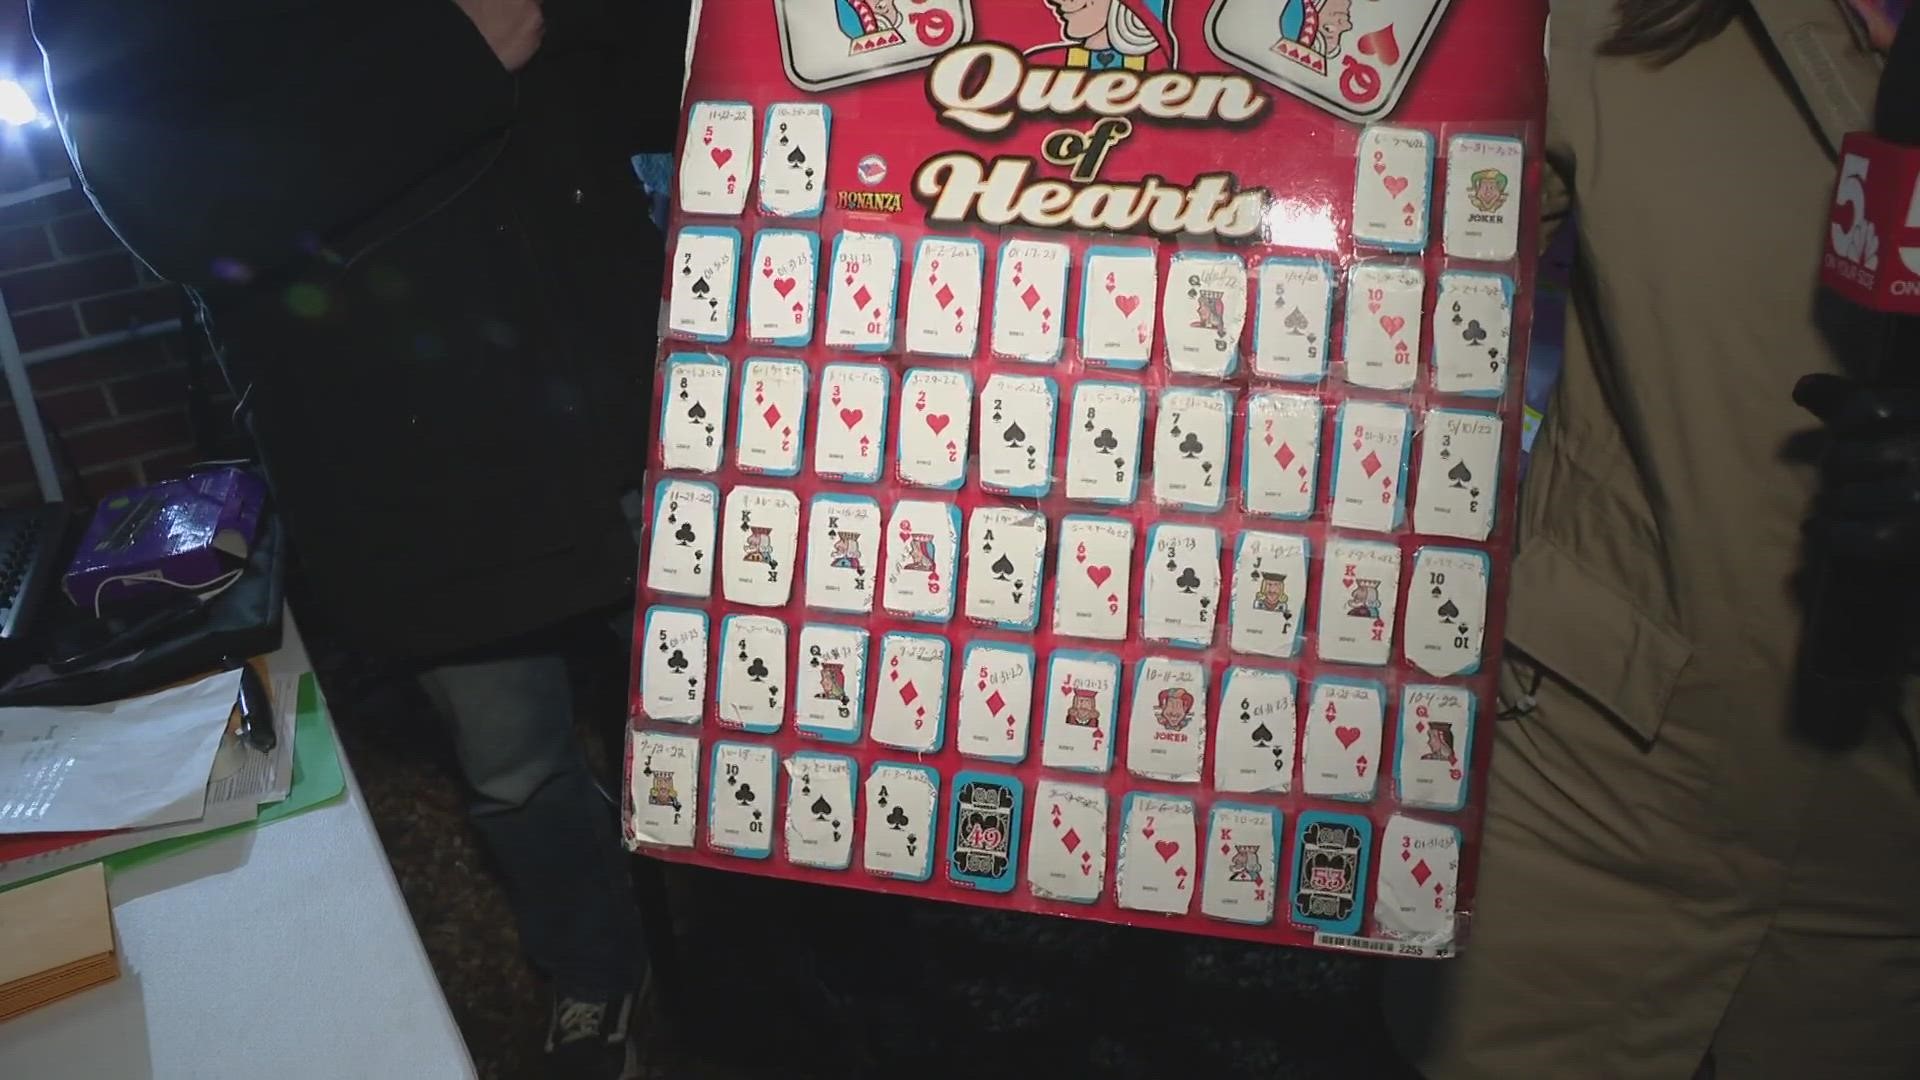 There will be no ticket sales after 6:30 p.m. Tuesday, Jan. 31. The Queen of Hearts drawing will start at 7 p.m. at Outsiders in Waterloo.